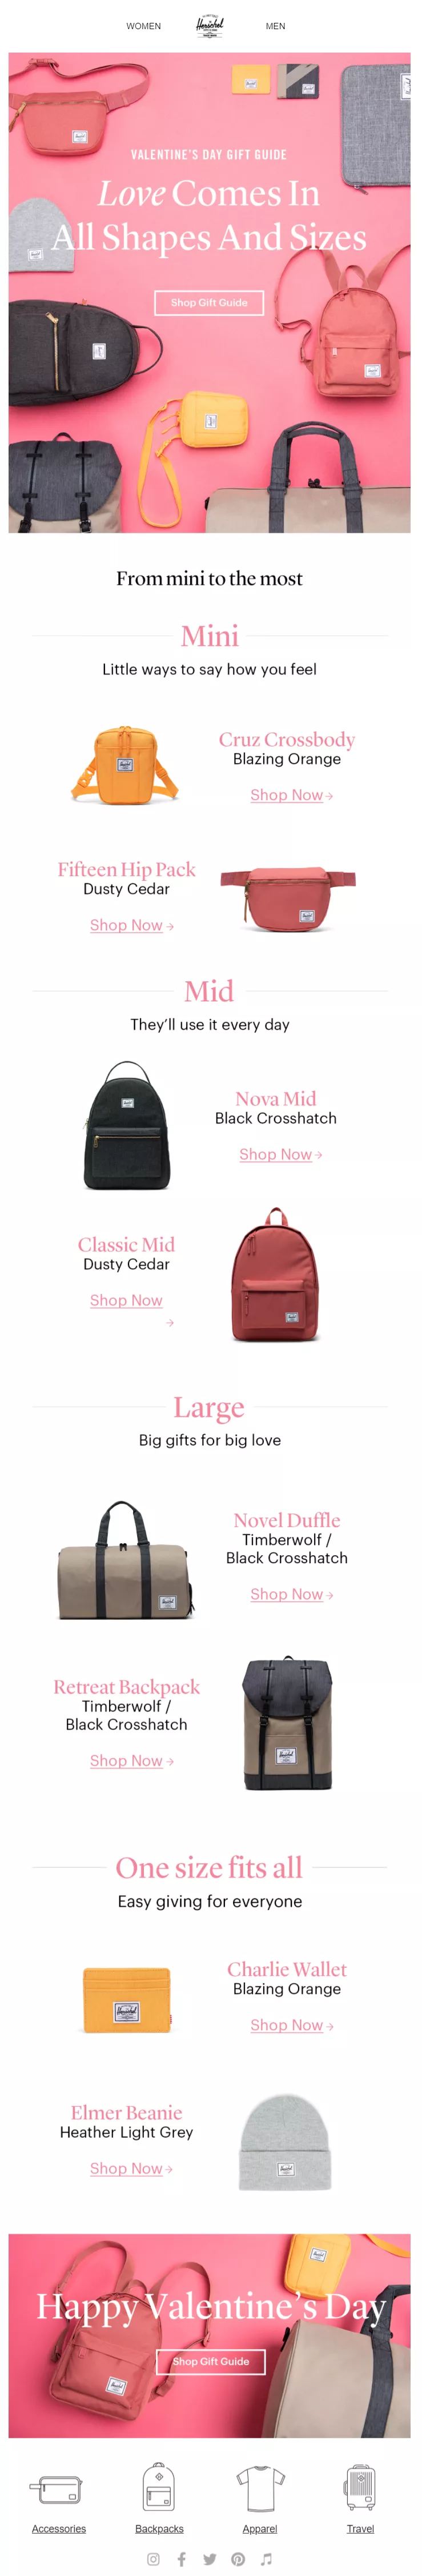 gift guide newletter for valentines day